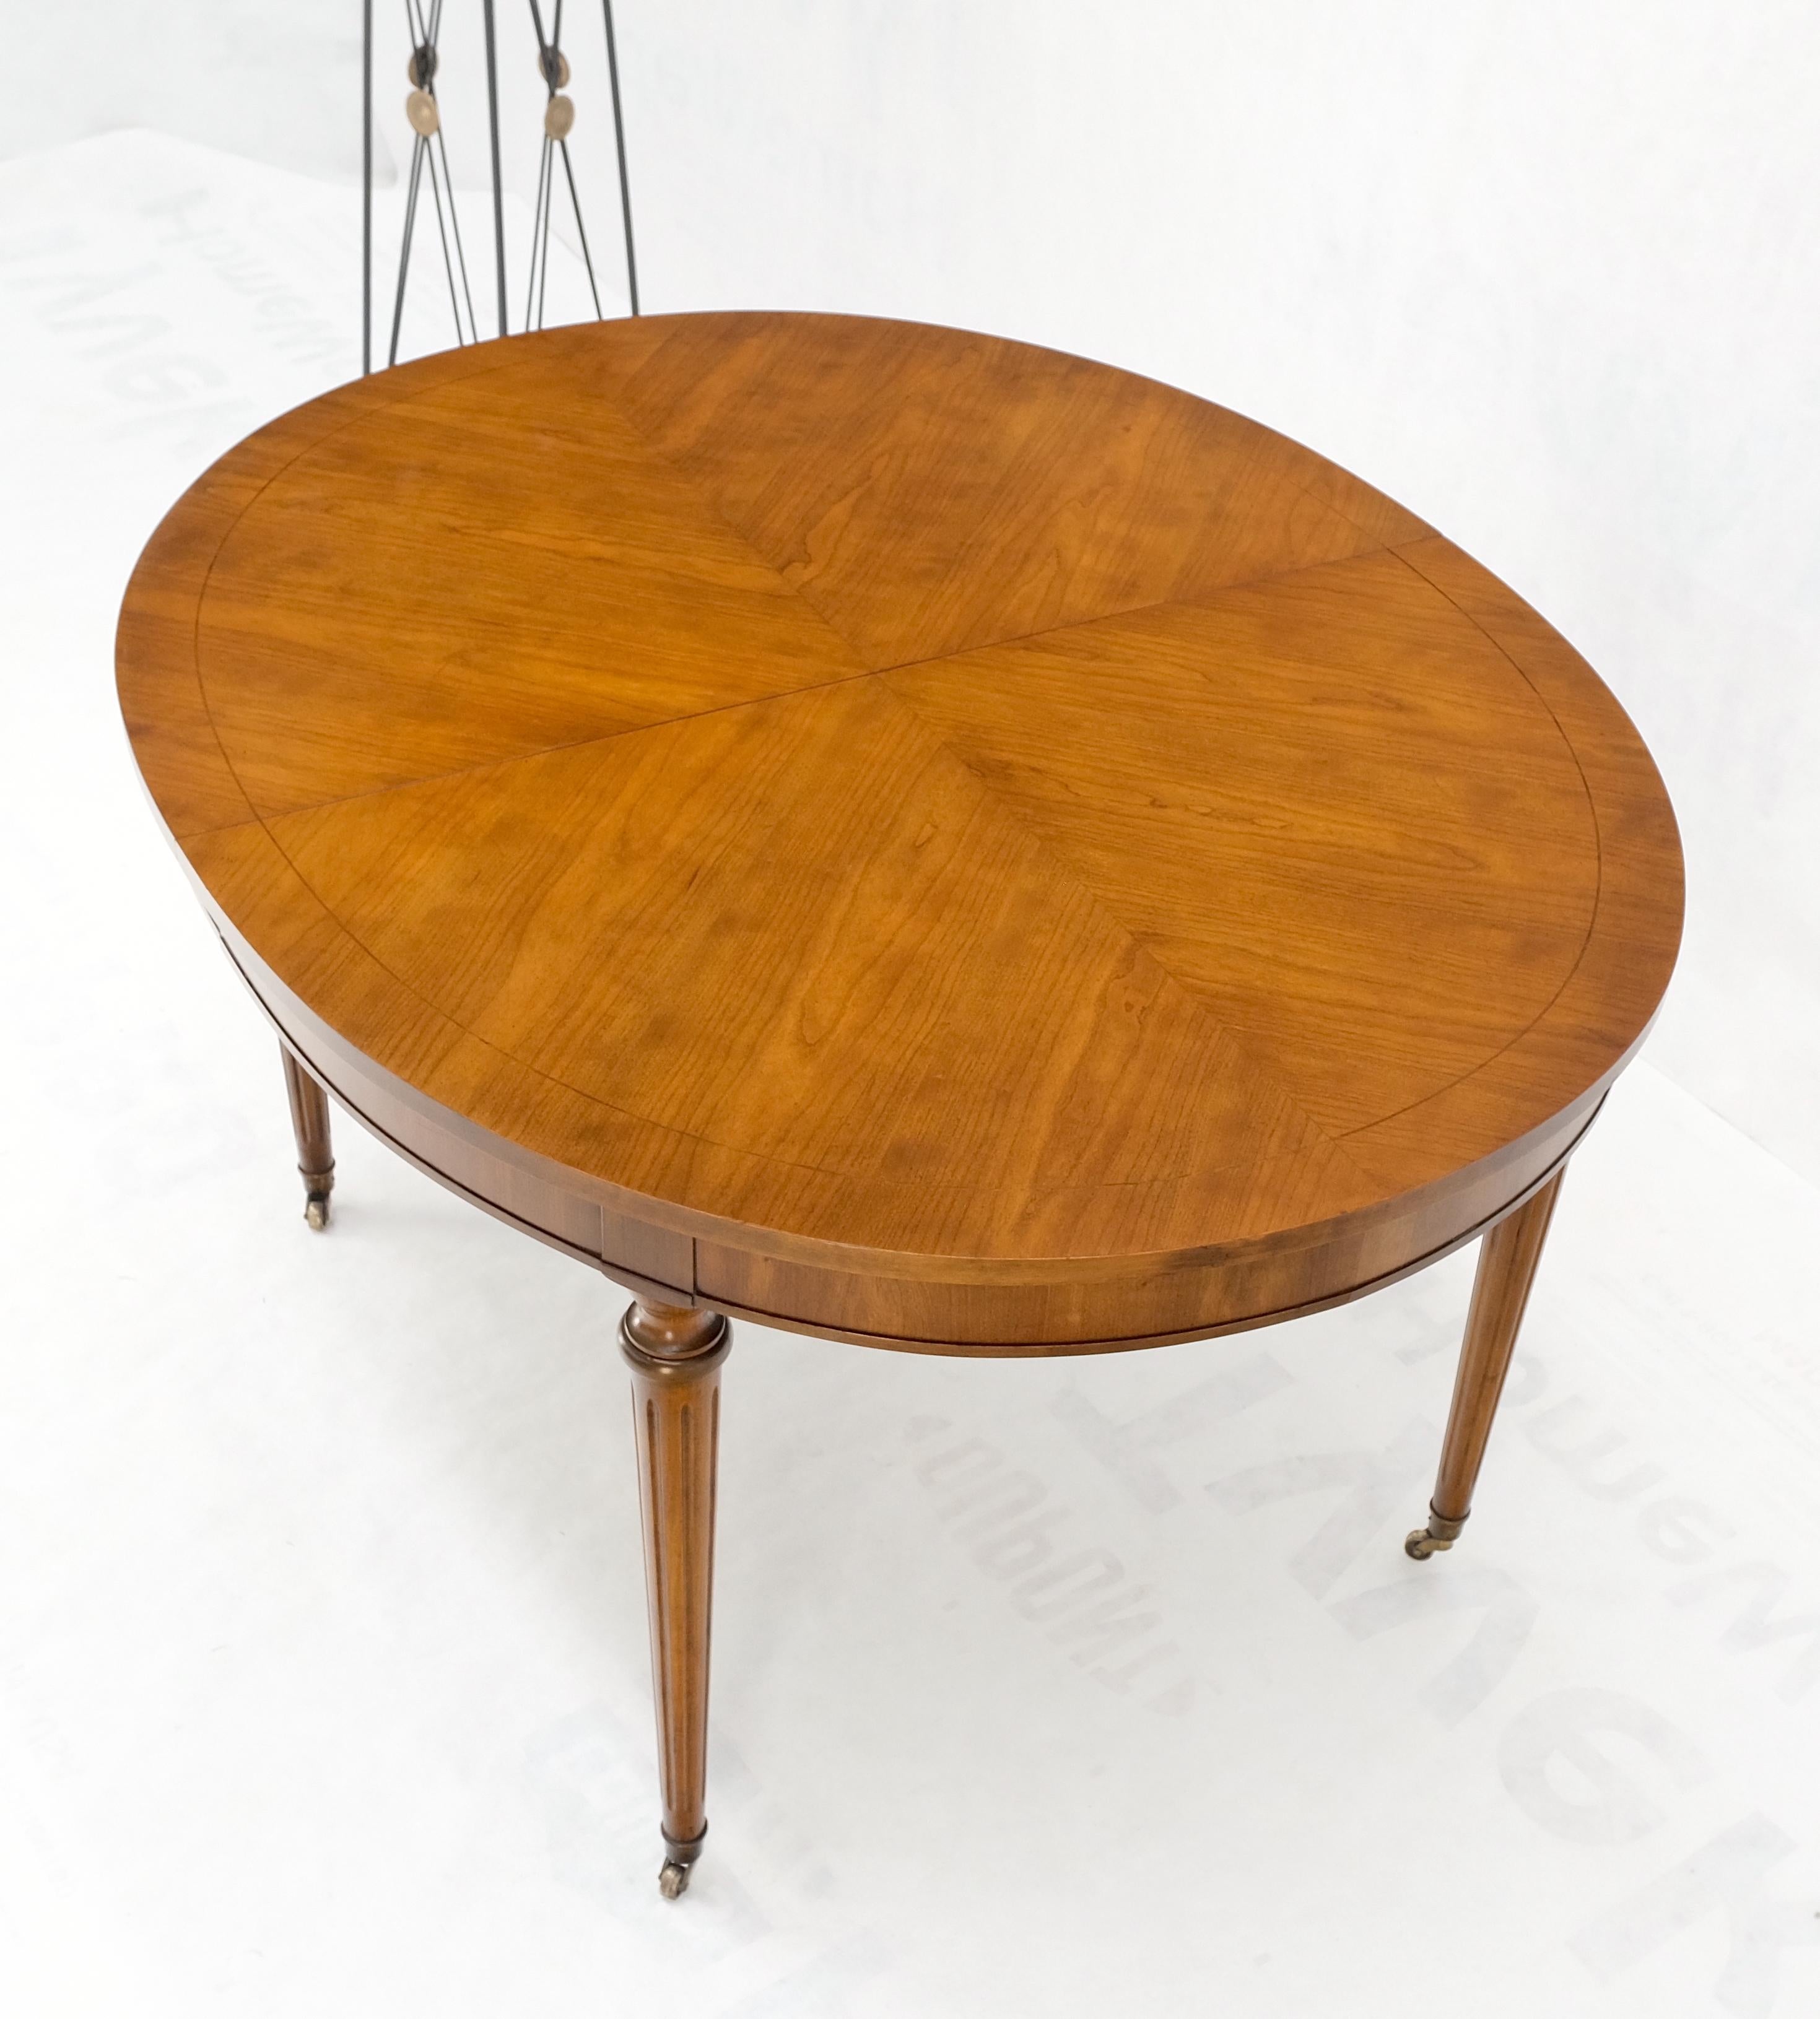 American Mid-Century Oval Satinwood DiningTable 3 Leaves Fluted Tapered Leg Mint For Sale 7